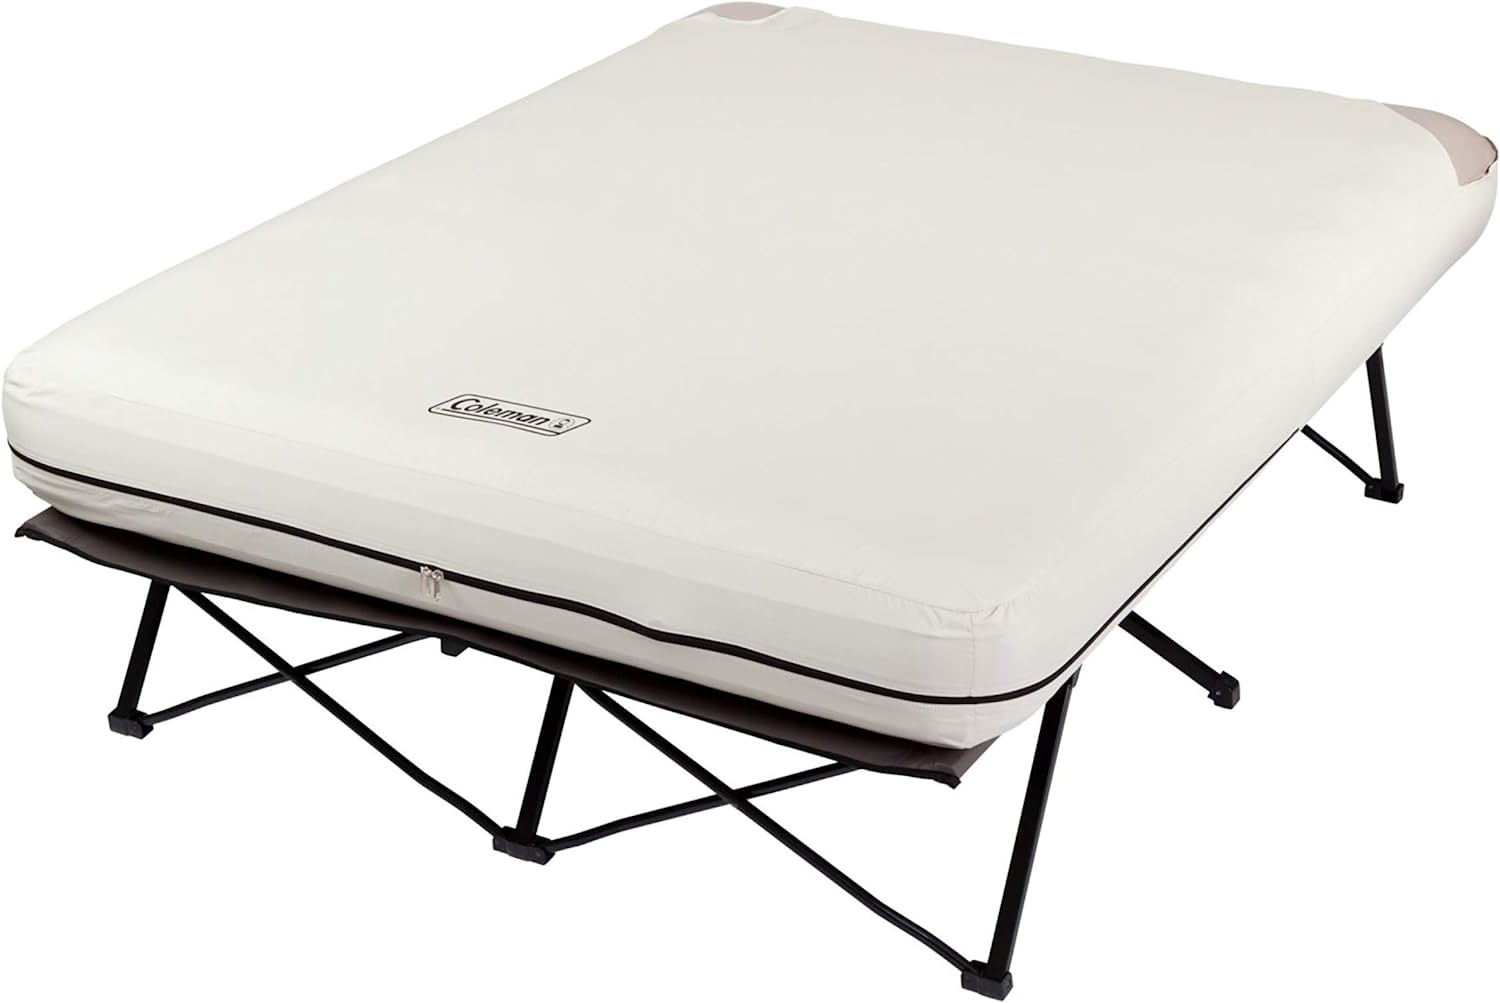 Coleman Camping Cot, Air Mattress, & Battery Operated Pump Combo w/ Side Tables: Queen $117.29, Twin $62.89 + Free Shipping